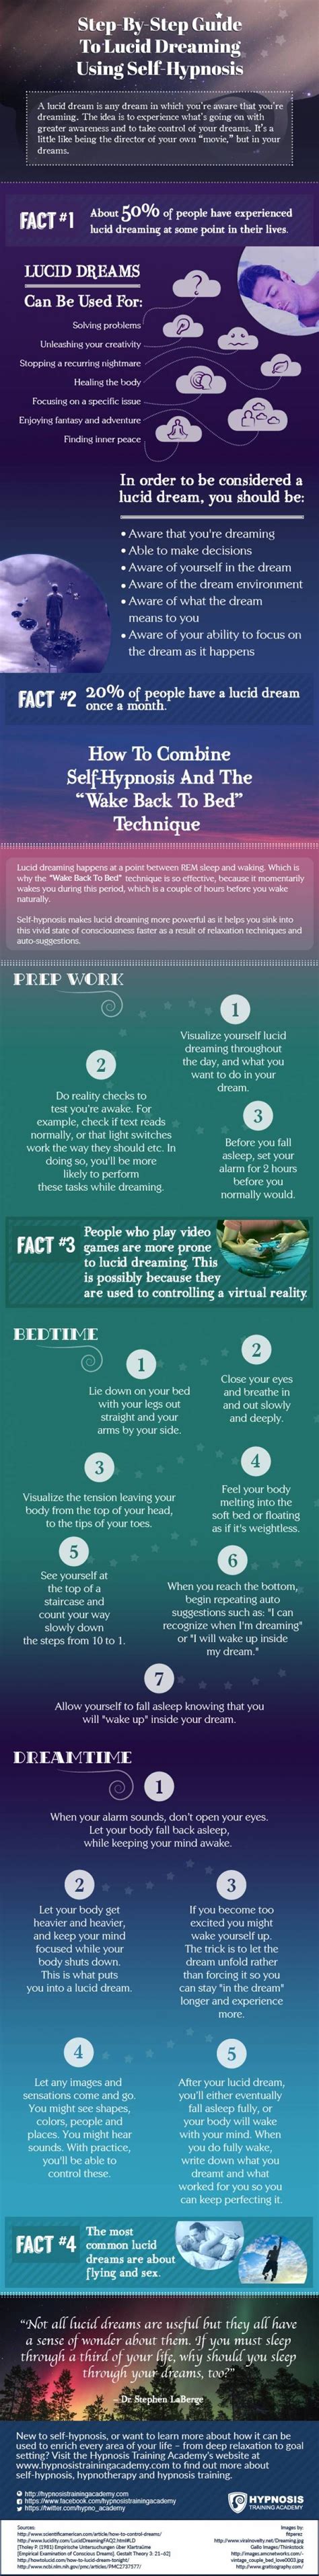 INFOGRAPHIC Guide To Lucid Dreaming Using Hypnosis Lucid Dreaming Hypnosis Lucid